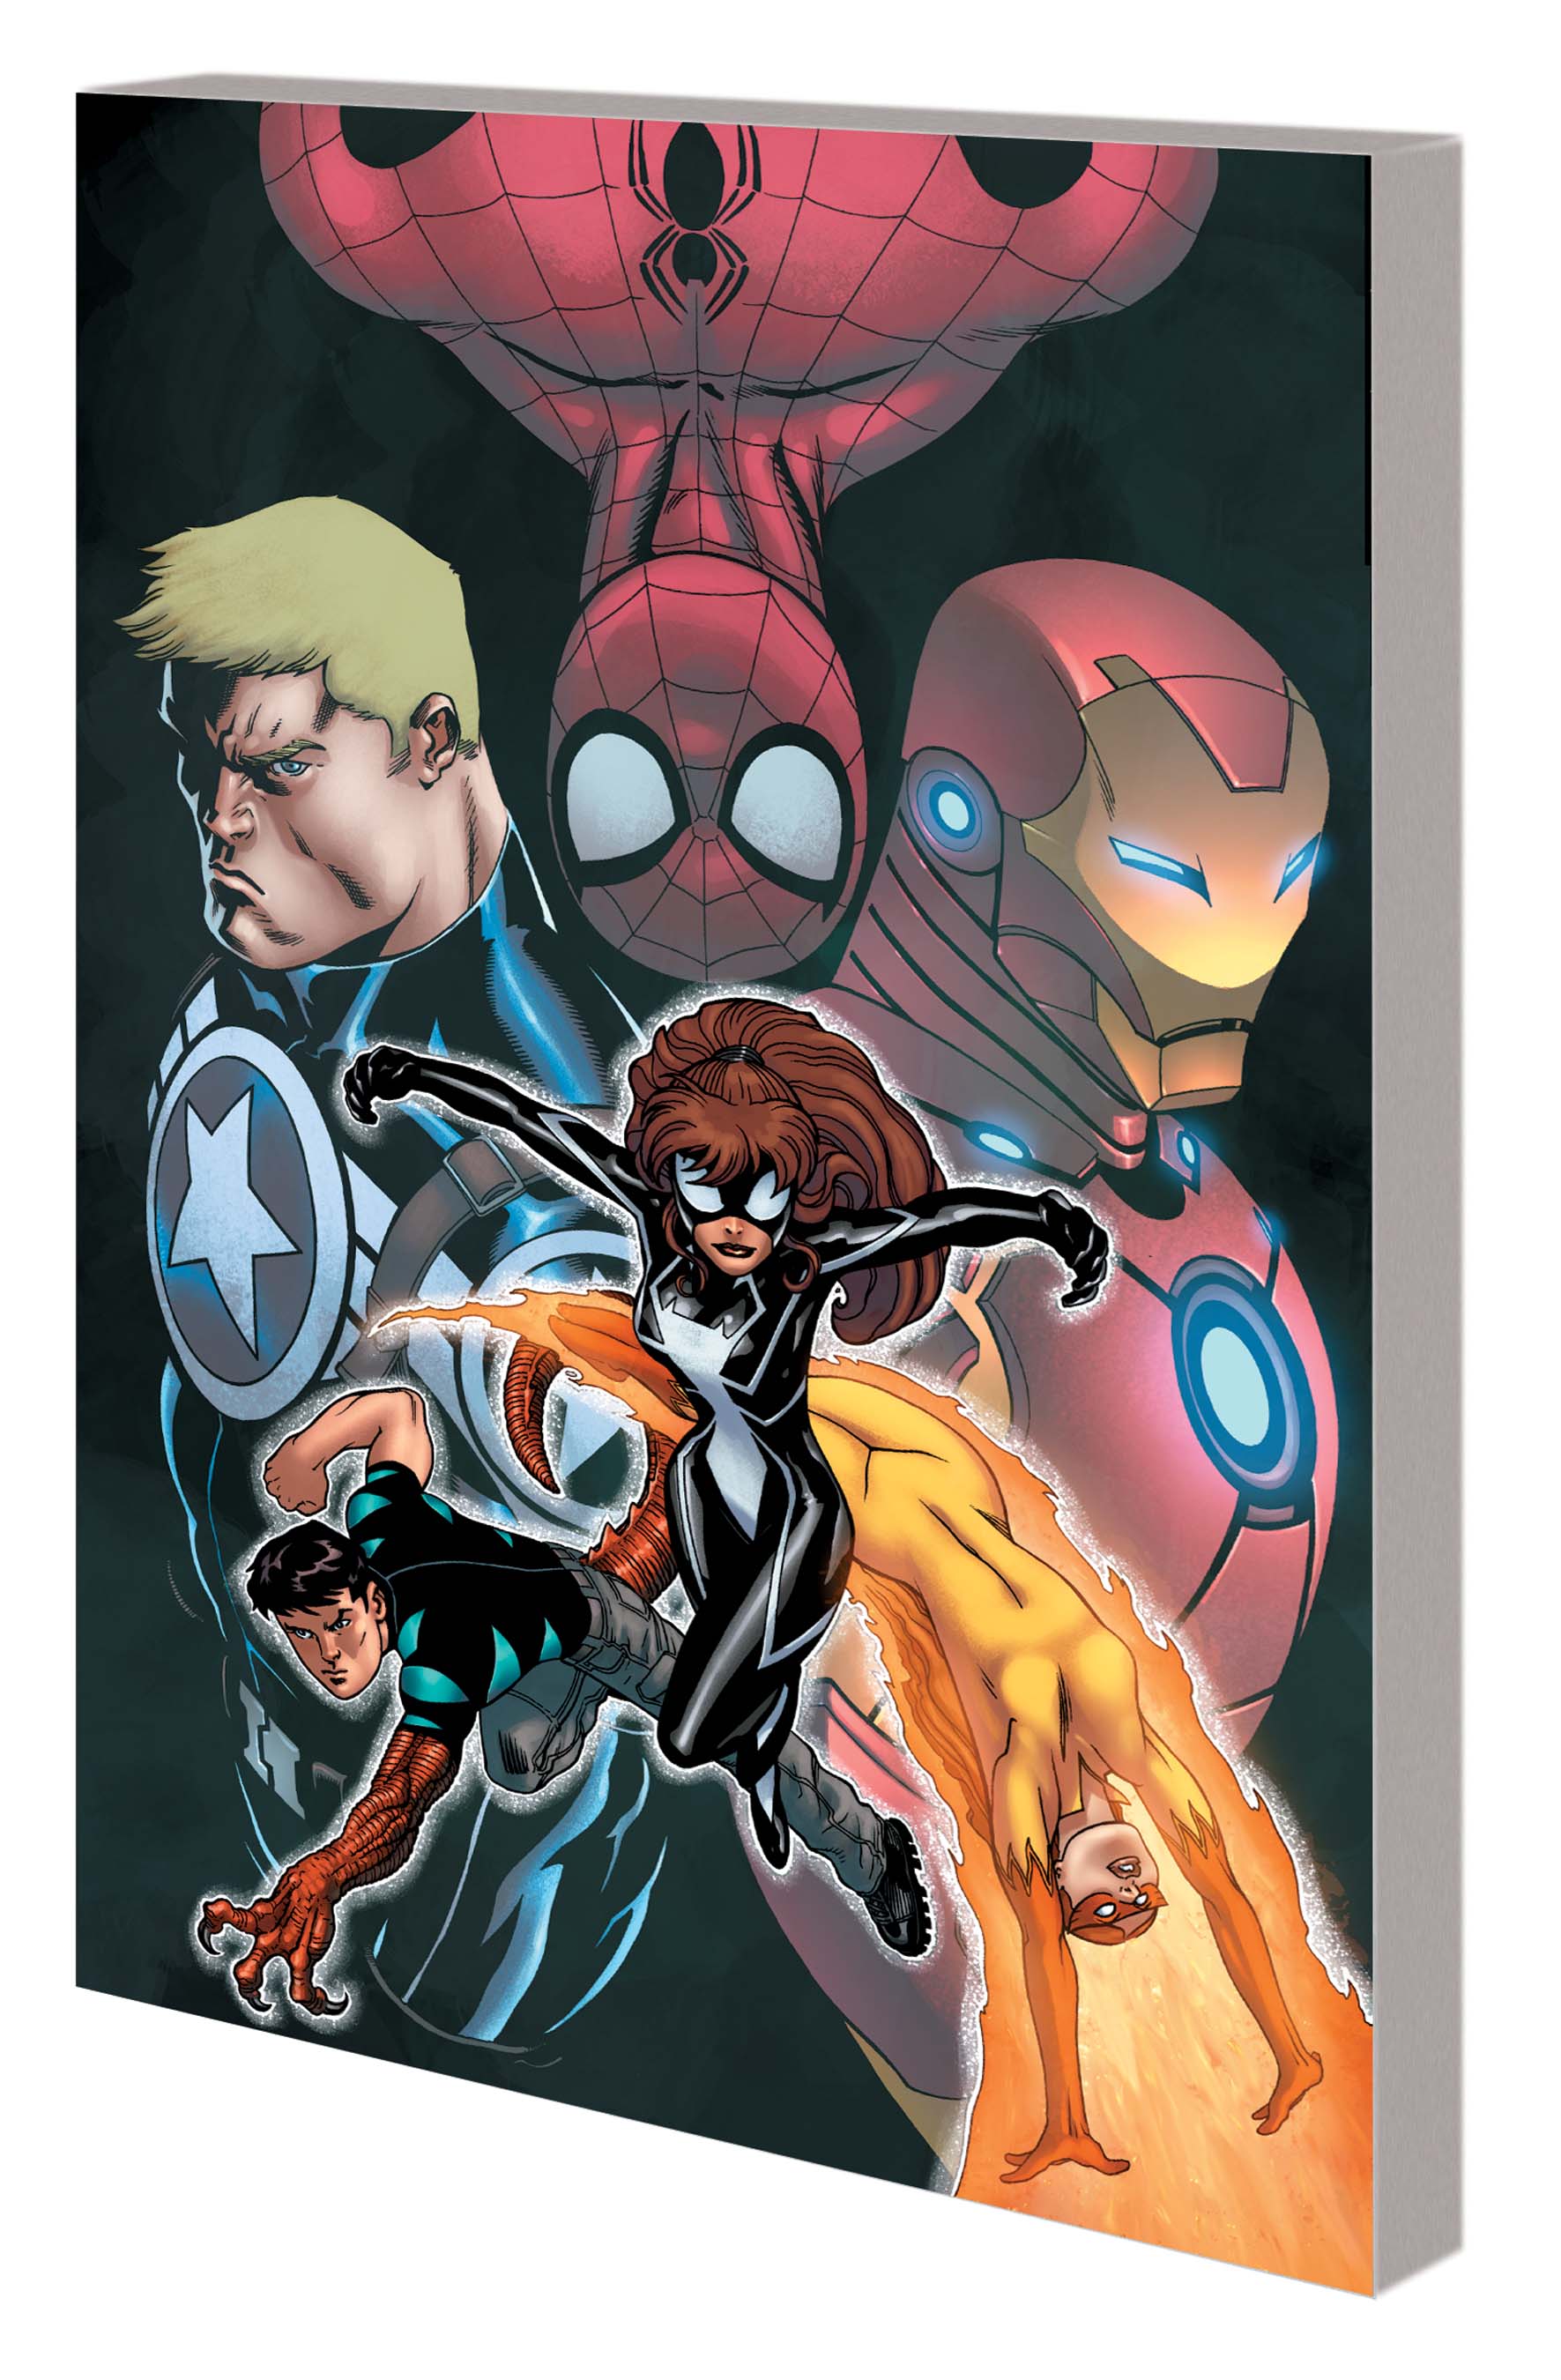 Avengers Academy: Arcade - Death Game (Trade Paperback)